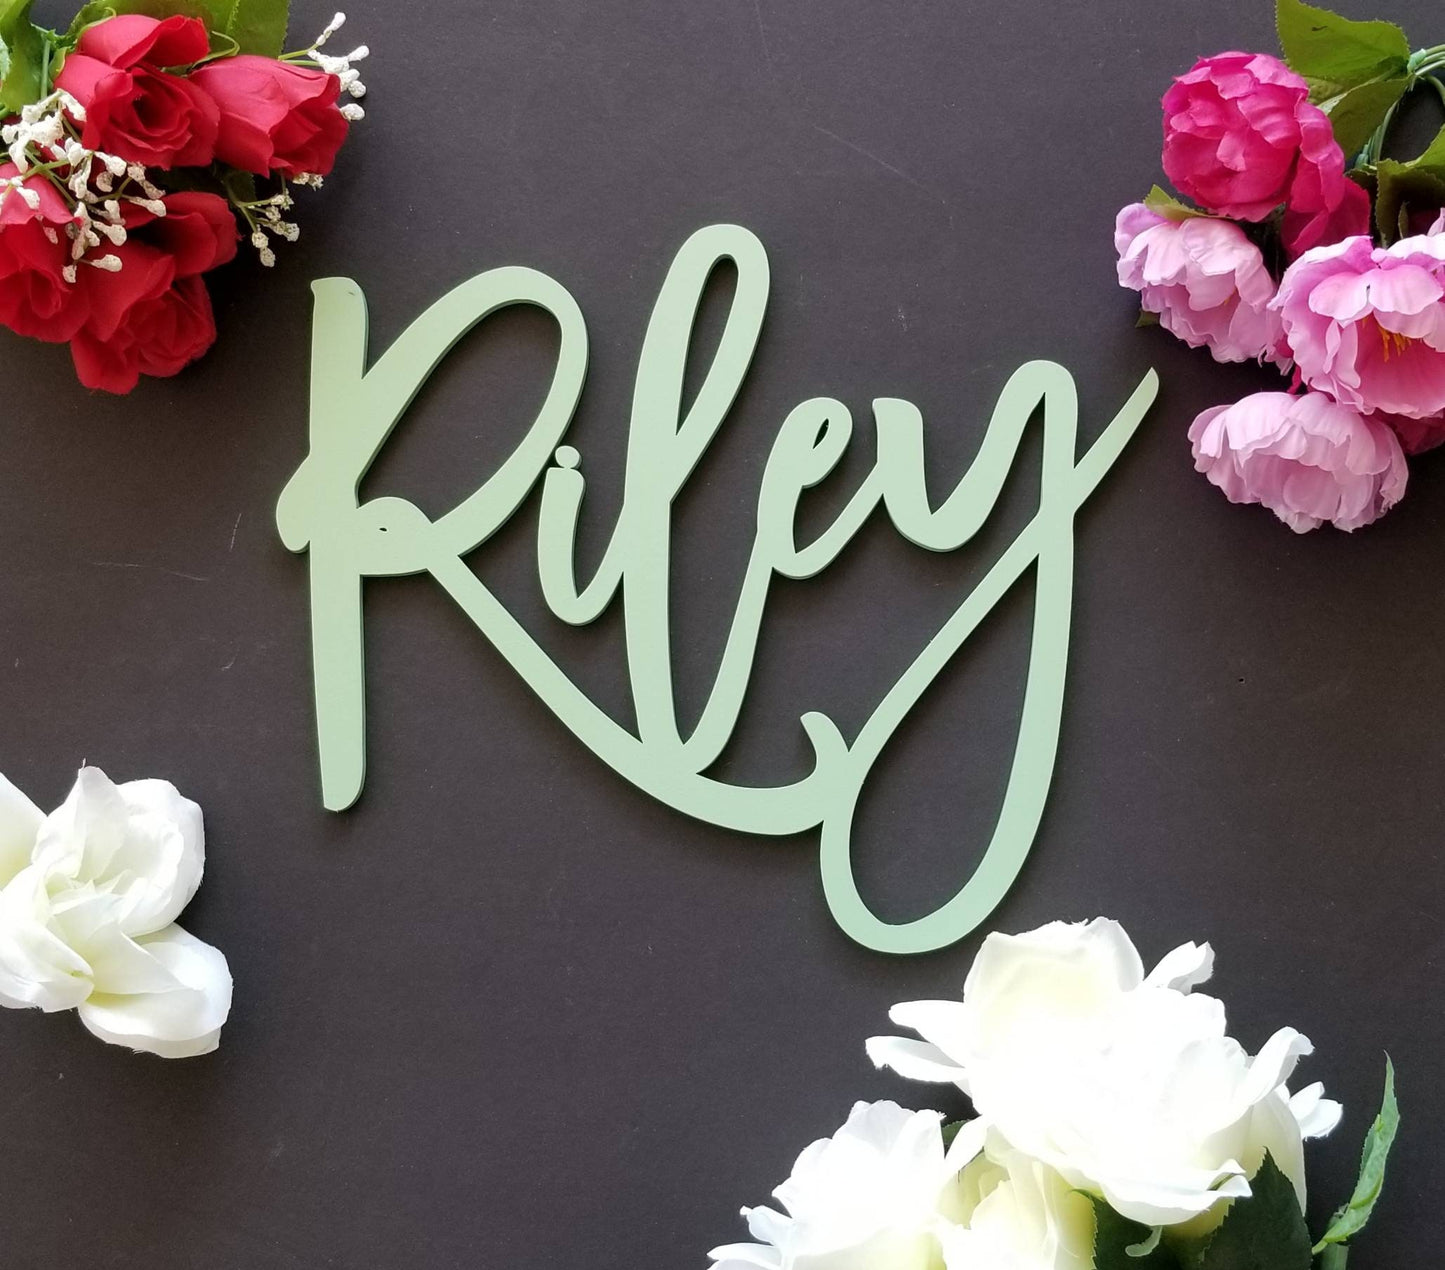 Personalized Name Sign. Custom Wood Name Nursery Sign. Wooden Name Sign. Childrens Name sign. Nursery Decor, baby shower gift, script font